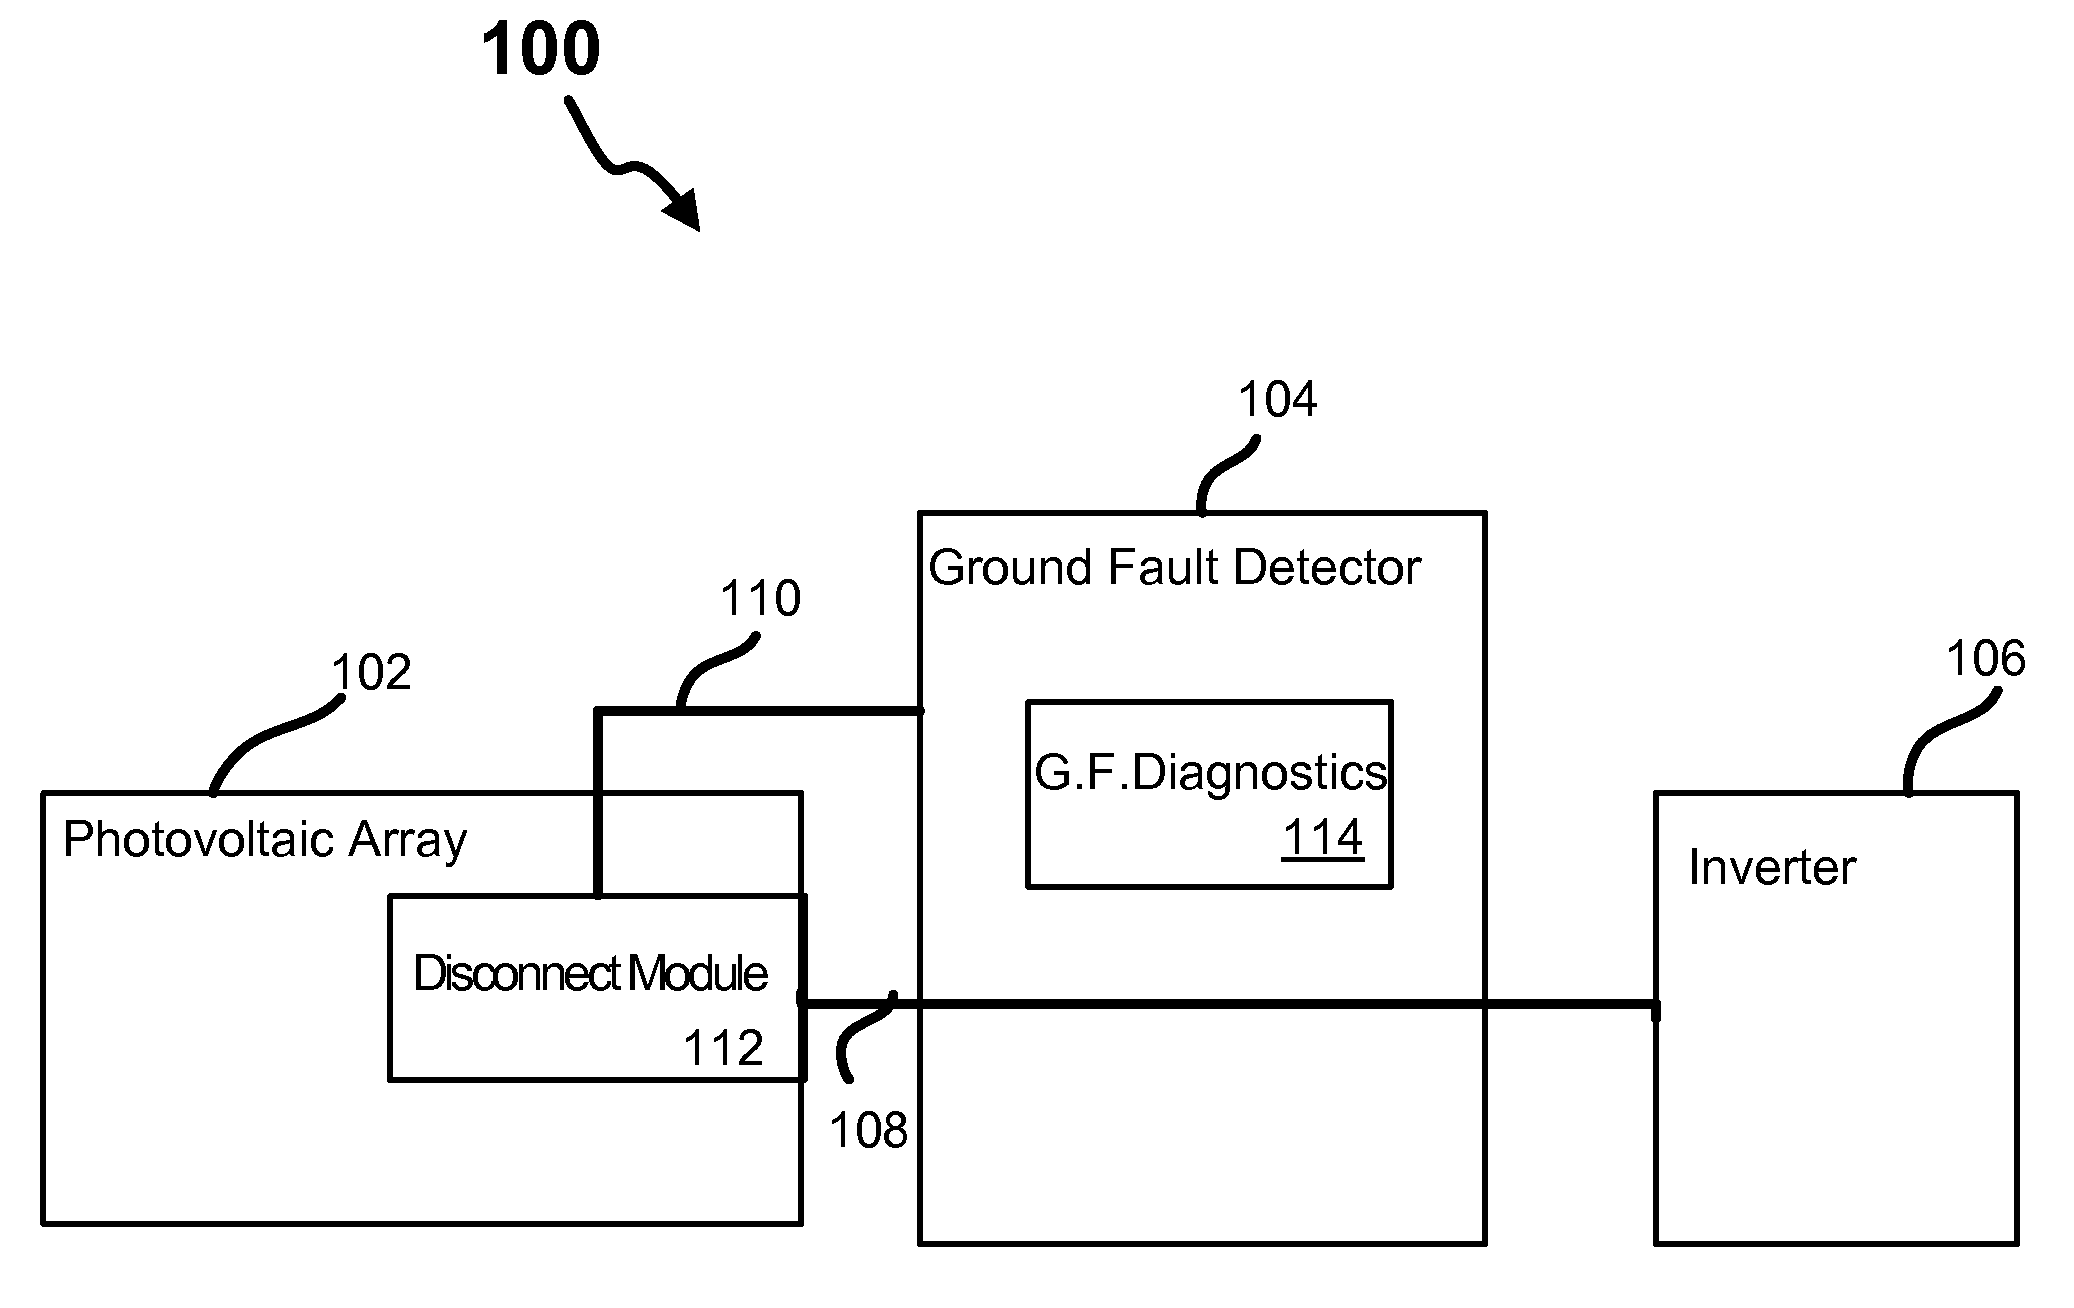 System and method for ground fault detection and interruption